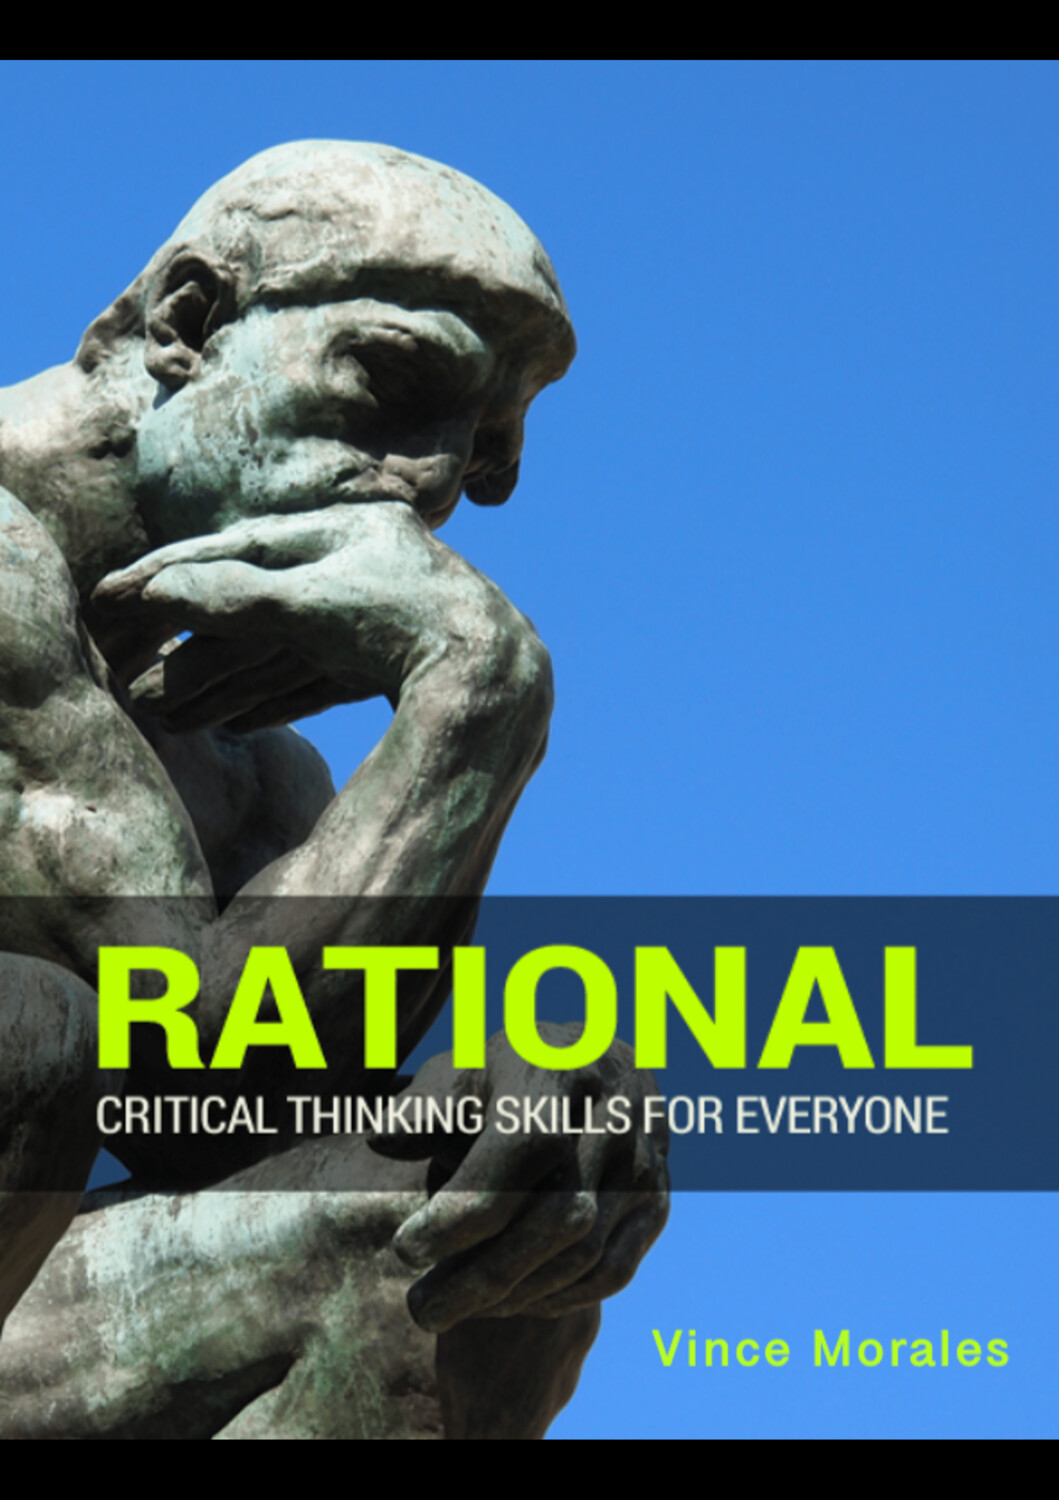 Rational: Critical Thinking Skills for Everyone by Vince Morales